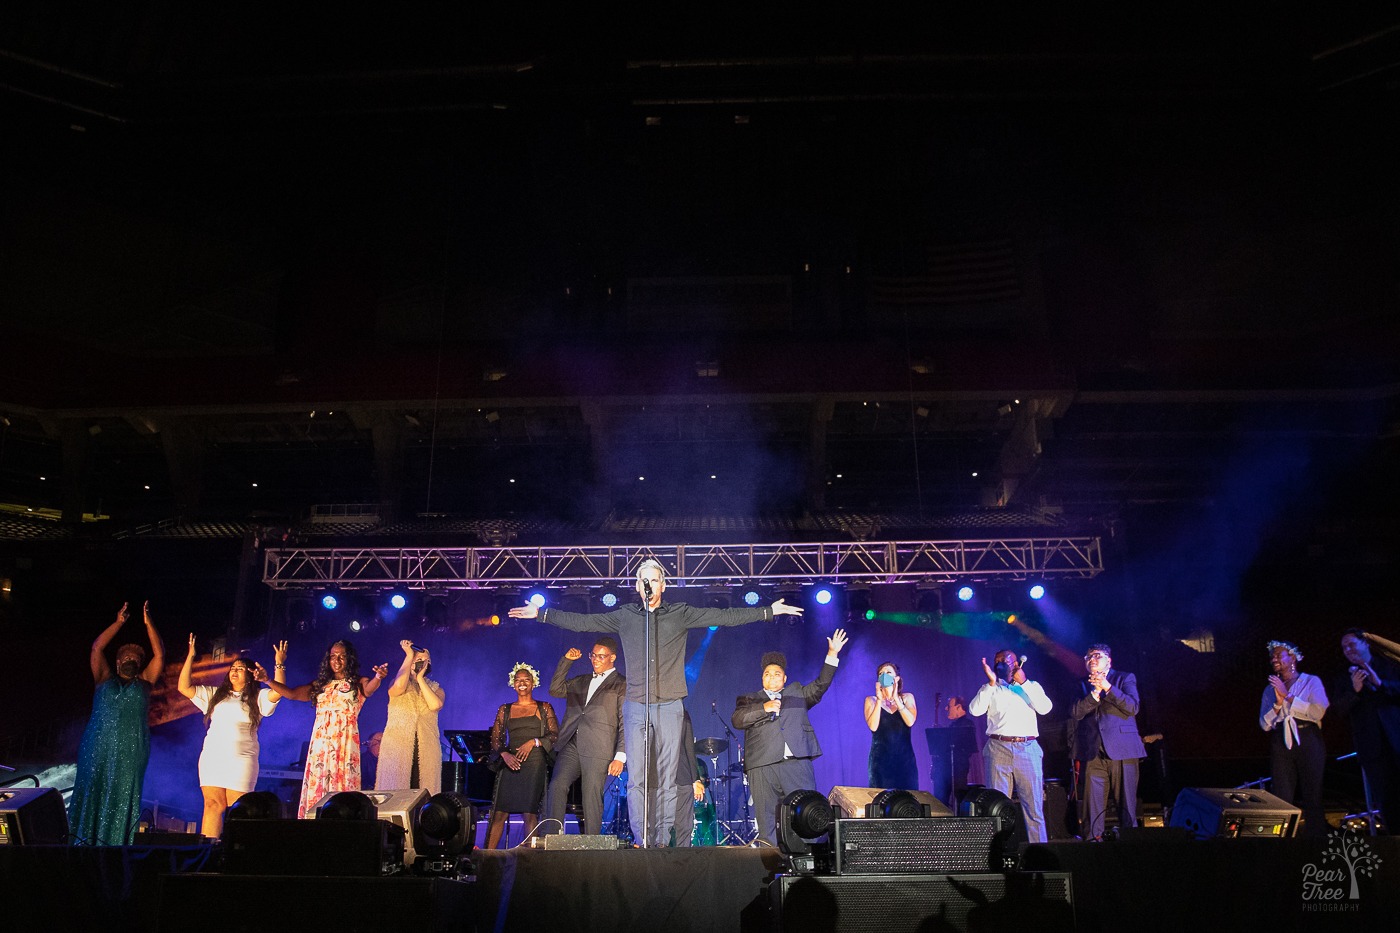 Covenant House Georgia youth on stage with broadway performers at Mercedes Benz stadium in Atlanta